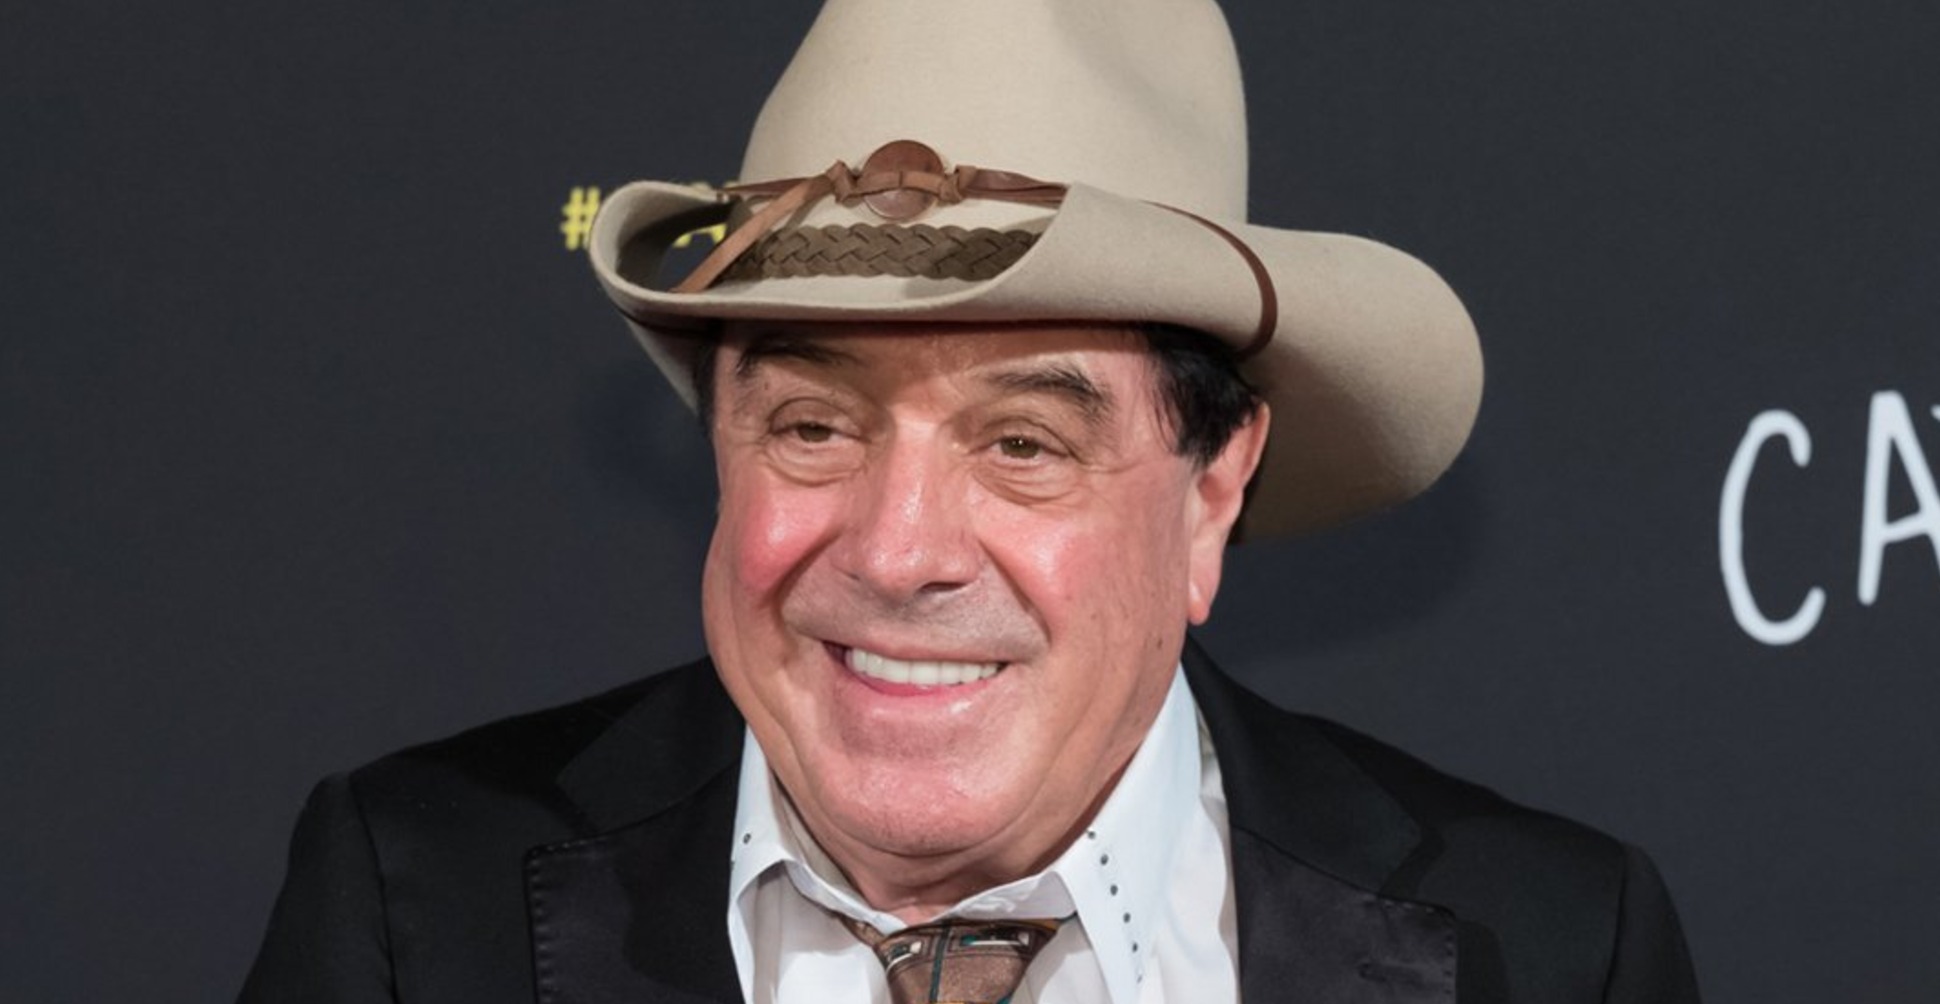 Molly Meldrum wants Margaret Court Arena renamed